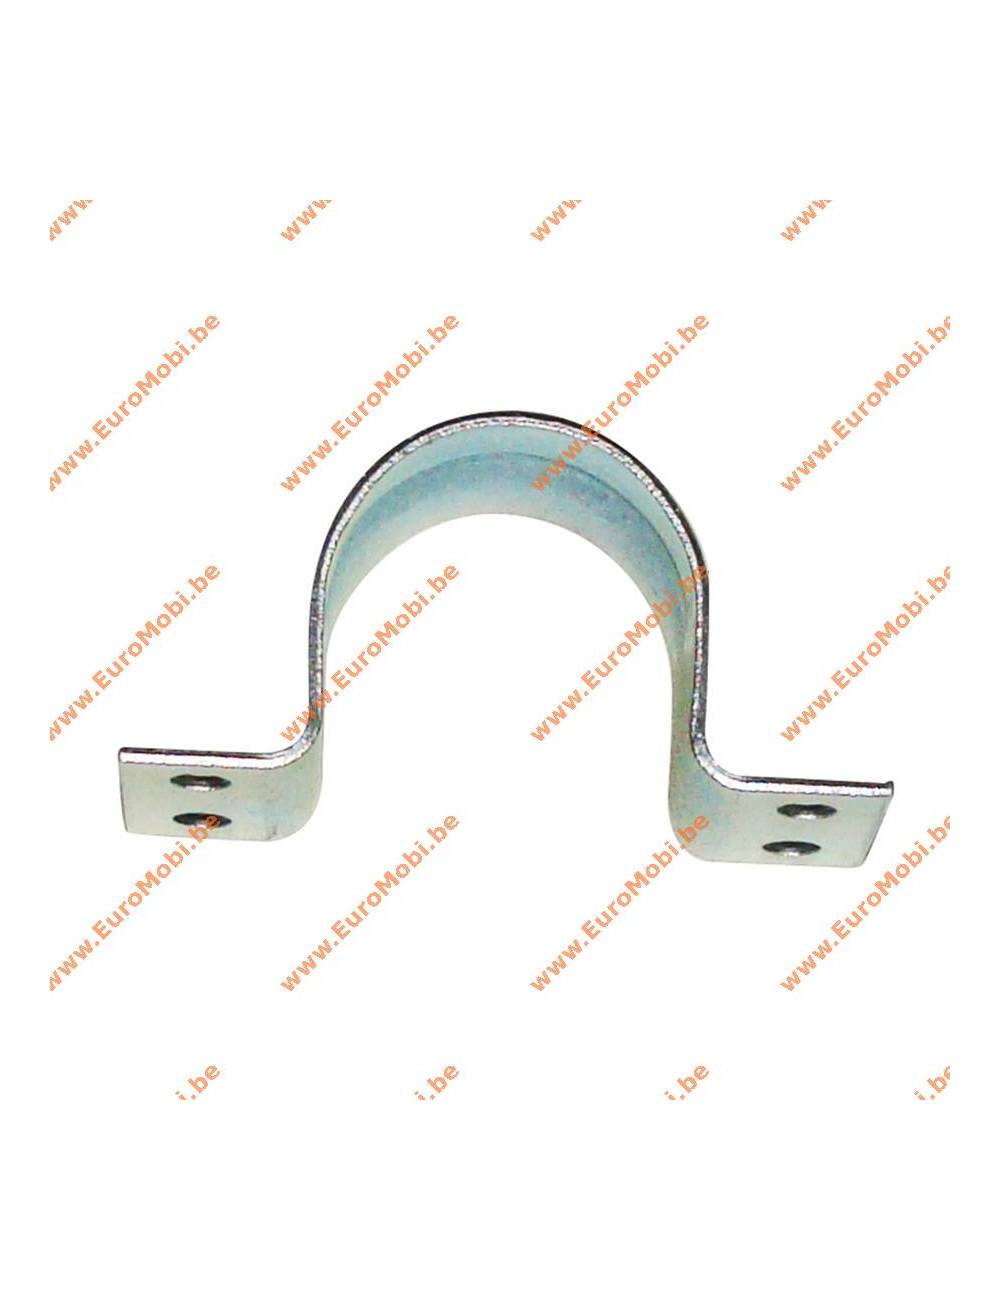 Pipe bracket 19 mm galvanized Mater table